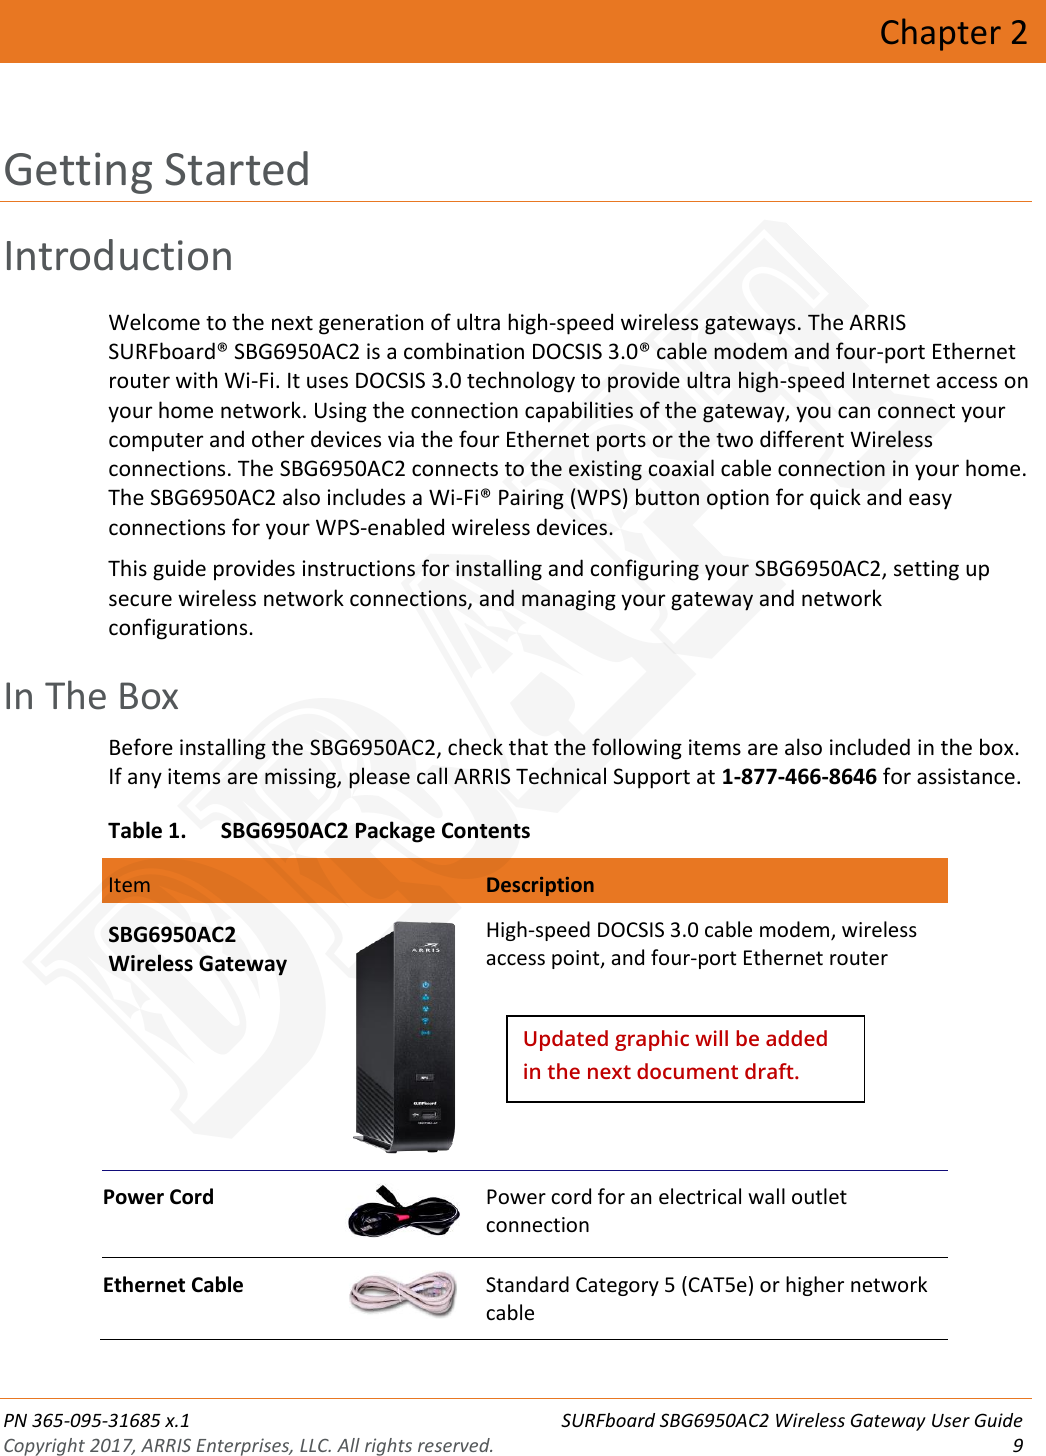  PN 365-095-31685 x.1 SURFboard SBG6950AC2 Wireless Gateway User Guide Copyright 2017, ARRIS Enterprises, LLC. All rights reserved.  9  Chapter 2 Getting Started Introduction Welcome to the next generation of ultra high-speed wireless gateways. The ARRIS SURFboard® SBG6950AC2 is a combination DOCSIS 3.0® cable modem and four-port Ethernet router with Wi-Fi. It uses DOCSIS 3.0 technology to provide ultra high-speed Internet access on your home network. Using the connection capabilities of the gateway, you can connect your computer and other devices via the four Ethernet ports or the two different Wireless connections. The SBG6950AC2 connects to the existing coaxial cable connection in your home. The SBG6950AC2 also includes a Wi-Fi® Pairing (WPS) button option for quick and easy connections for your WPS-enabled wireless devices. This guide provides instructions for installing and configuring your SBG6950AC2, setting up secure wireless network connections, and managing your gateway and network configurations.   In The Box Before installing the SBG6950AC2, check that the following items are also included in the box. If any items are missing, please call ARRIS Technical Support at 1-877-466-8646 for assistance. Table 1. SBG6950AC2 Package Contents  Item  Description  Blinking On (Solid) SBG6950AC2 Wireless Gateway  High-speed DOCSIS 3.0 cable modem, wireless access point, and four-port Ethernet router Power Cord  Power cord for an electrical wall outlet connection Ethernet Cable  Standard Category 5 (CAT5e) or higher network cable Updated graphic will be added in the next document draft. DRAFT